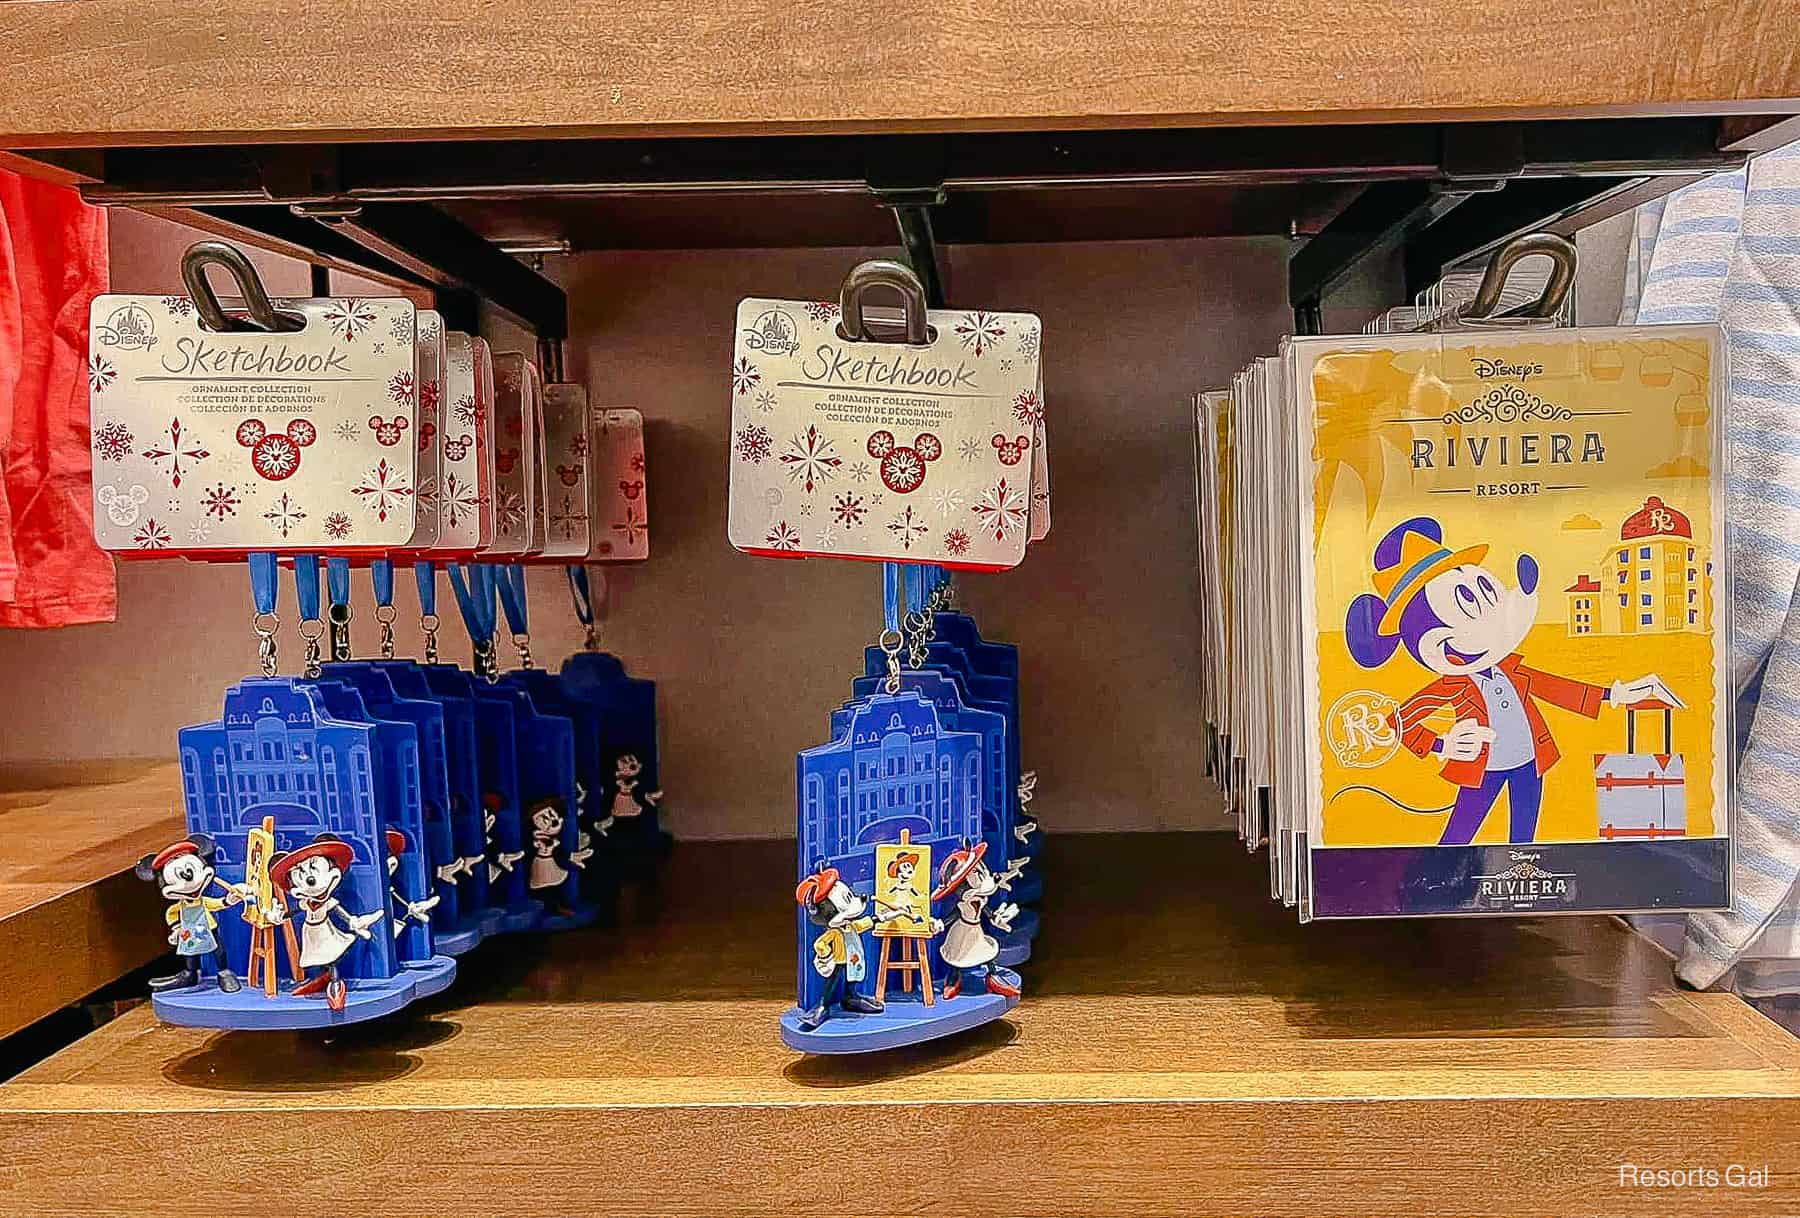 a Sketchbook ornament for Disney's Riviera Resort with Mickey and Minnie Mouse 